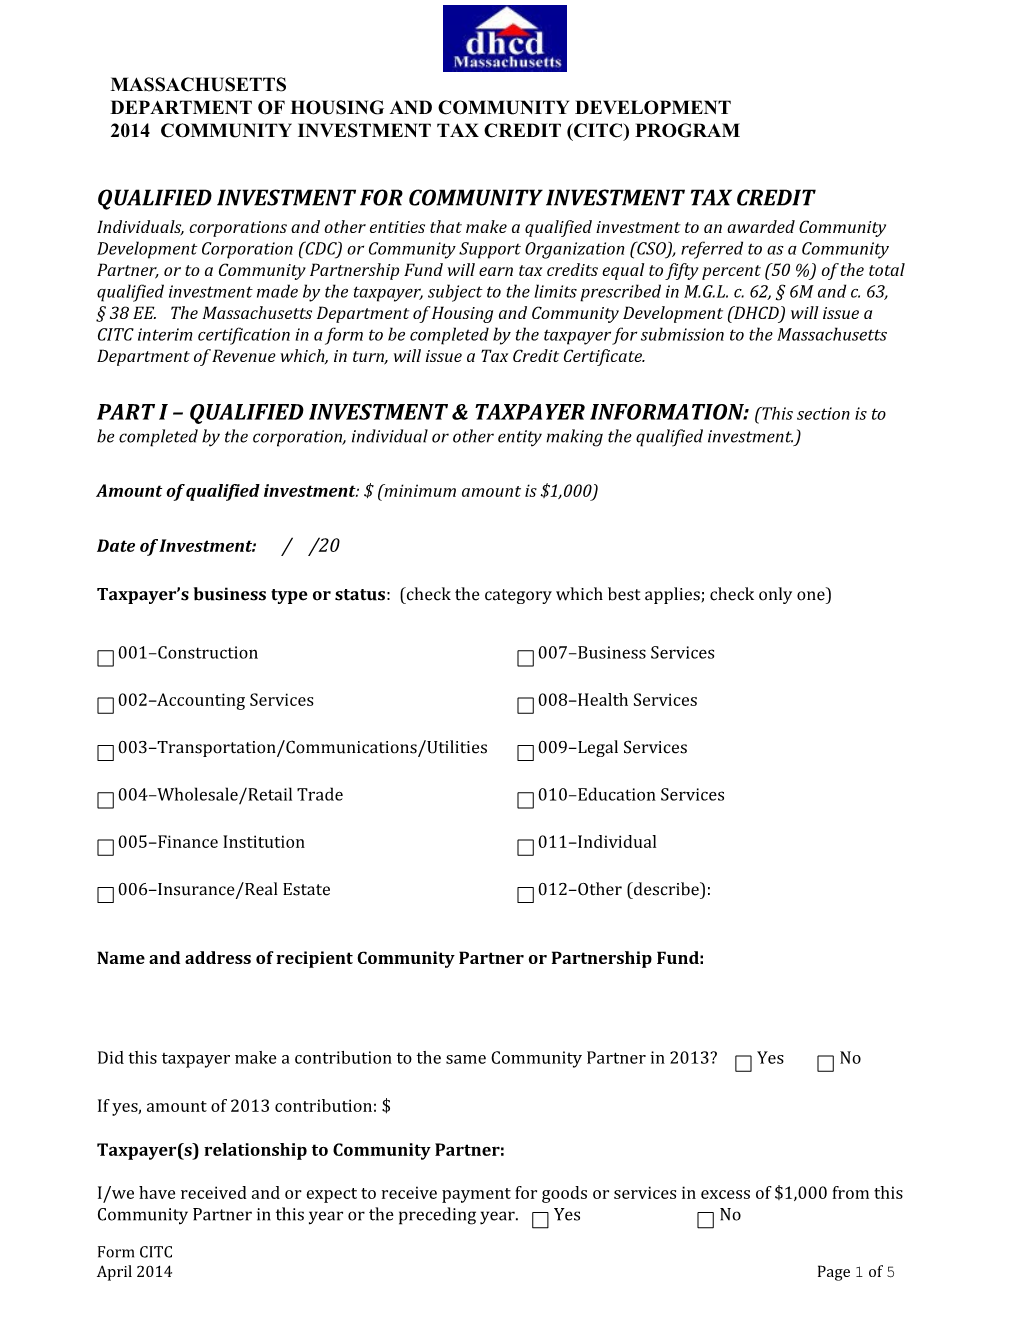 Qualified Investment for Community Investment Tax Credit